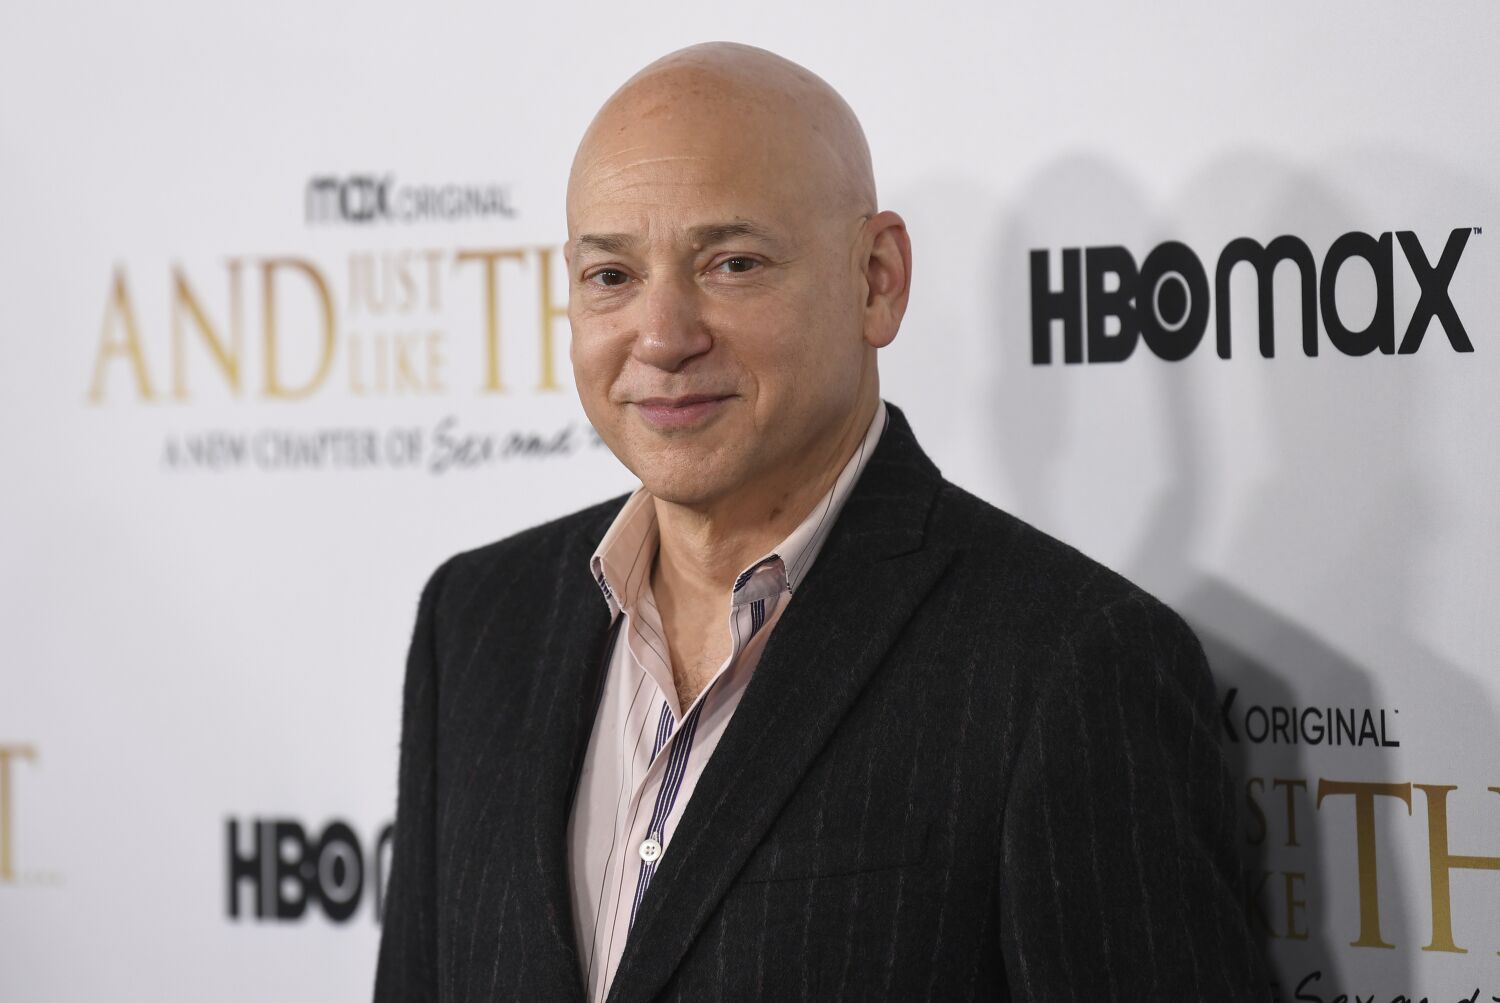 'And Just Like That' star Evan Handler praises Kim Cattrall's 'no- contact' cameo